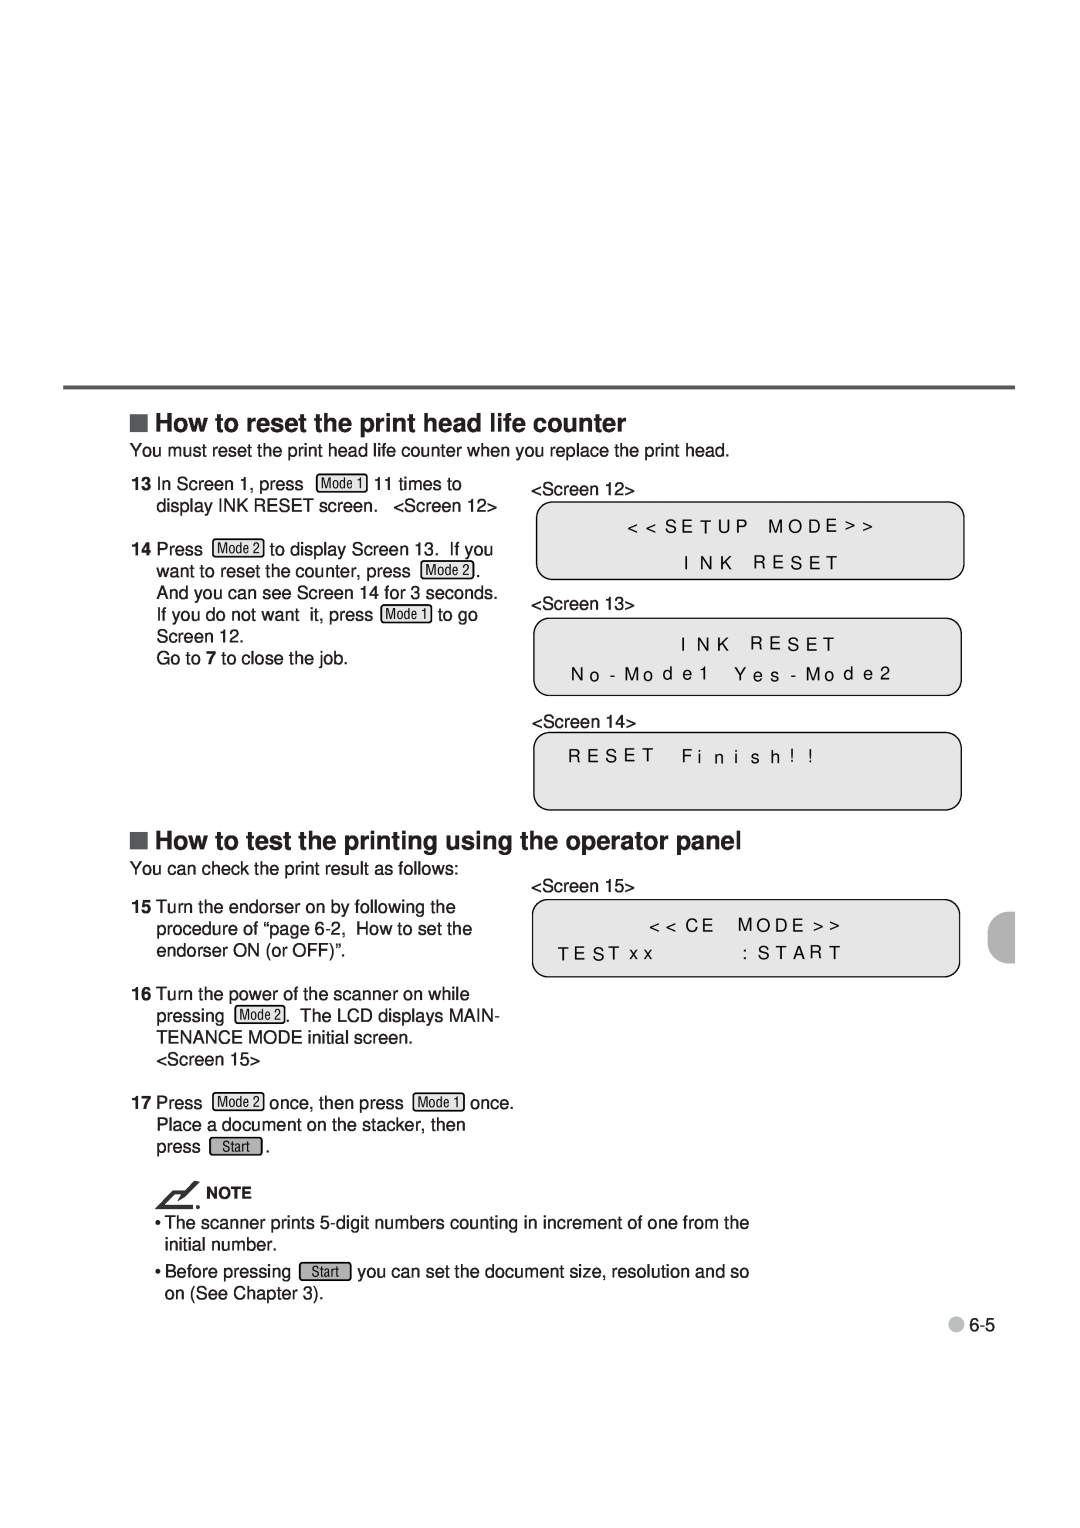 Fujitsu M3099GH manual How to reset the print head life counter, How to test the printing using the operator panel, Start 